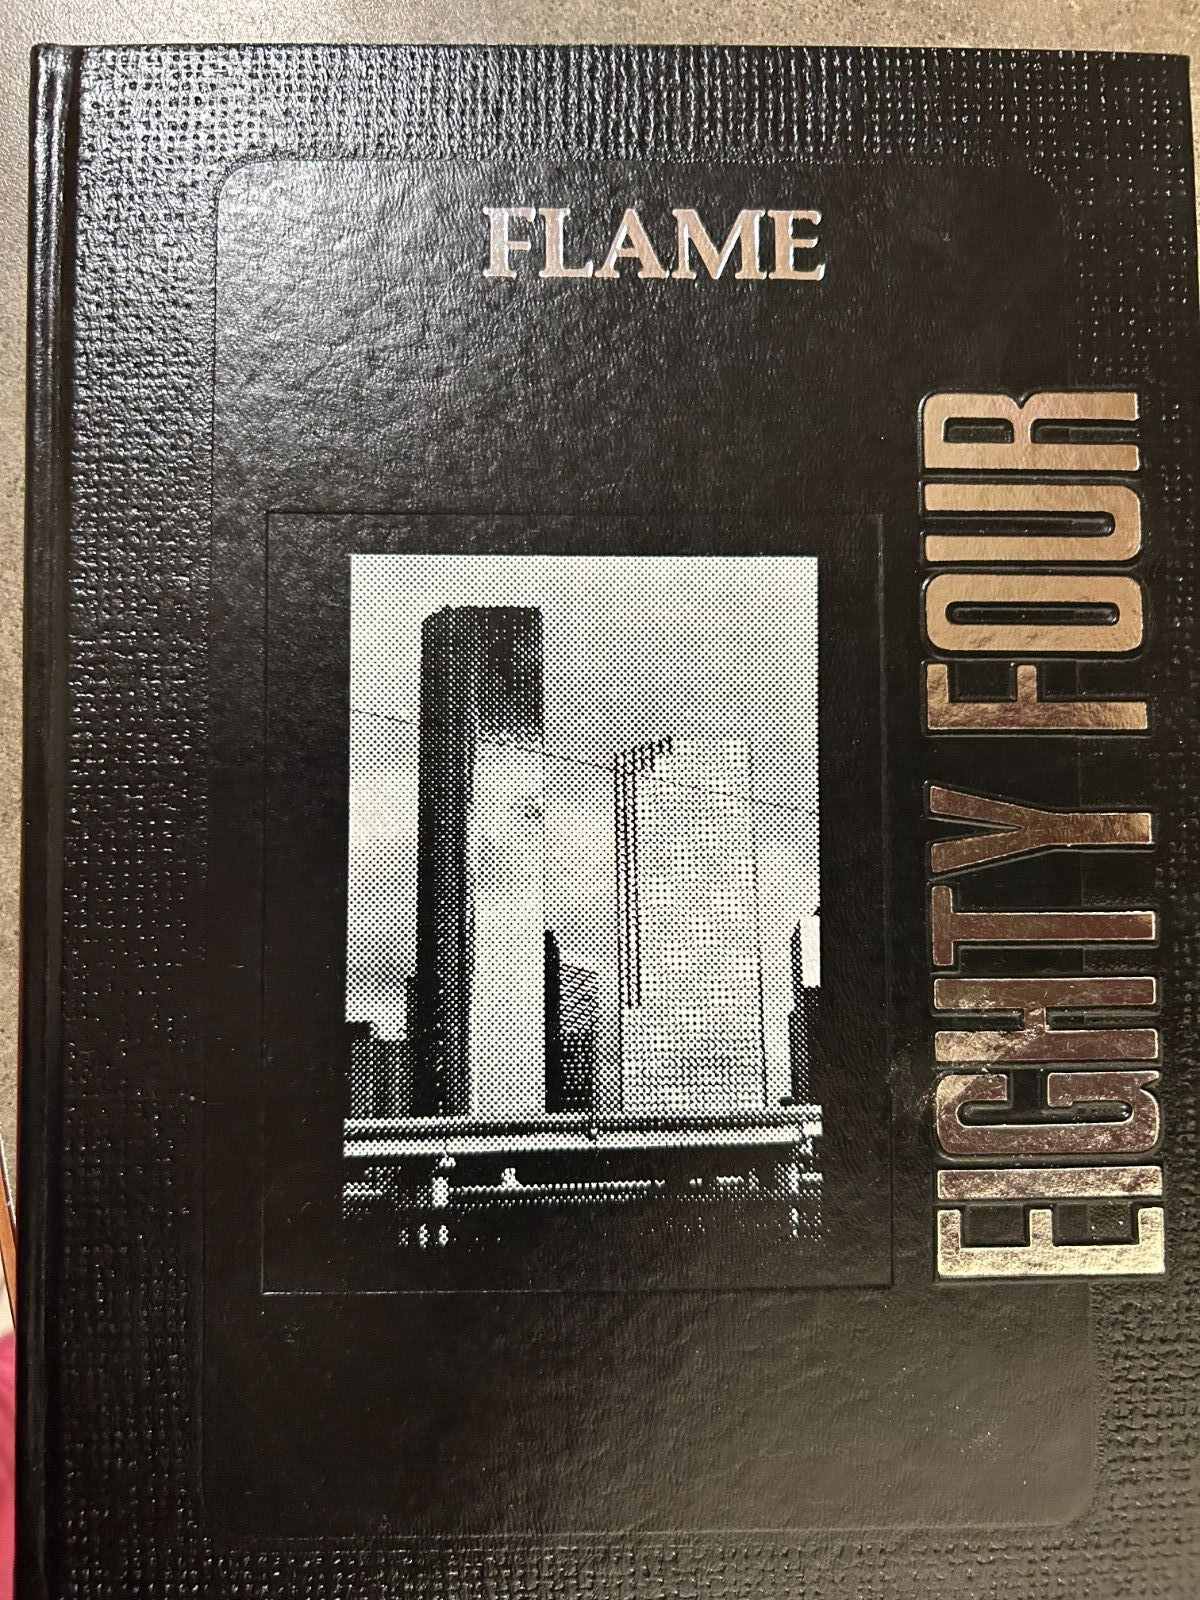 VINTAGE 1983 1984 FLAME SPRING VALE ACADEMY OWOSSO MICHIGAN HIGH SCHOOL YEARBOOK